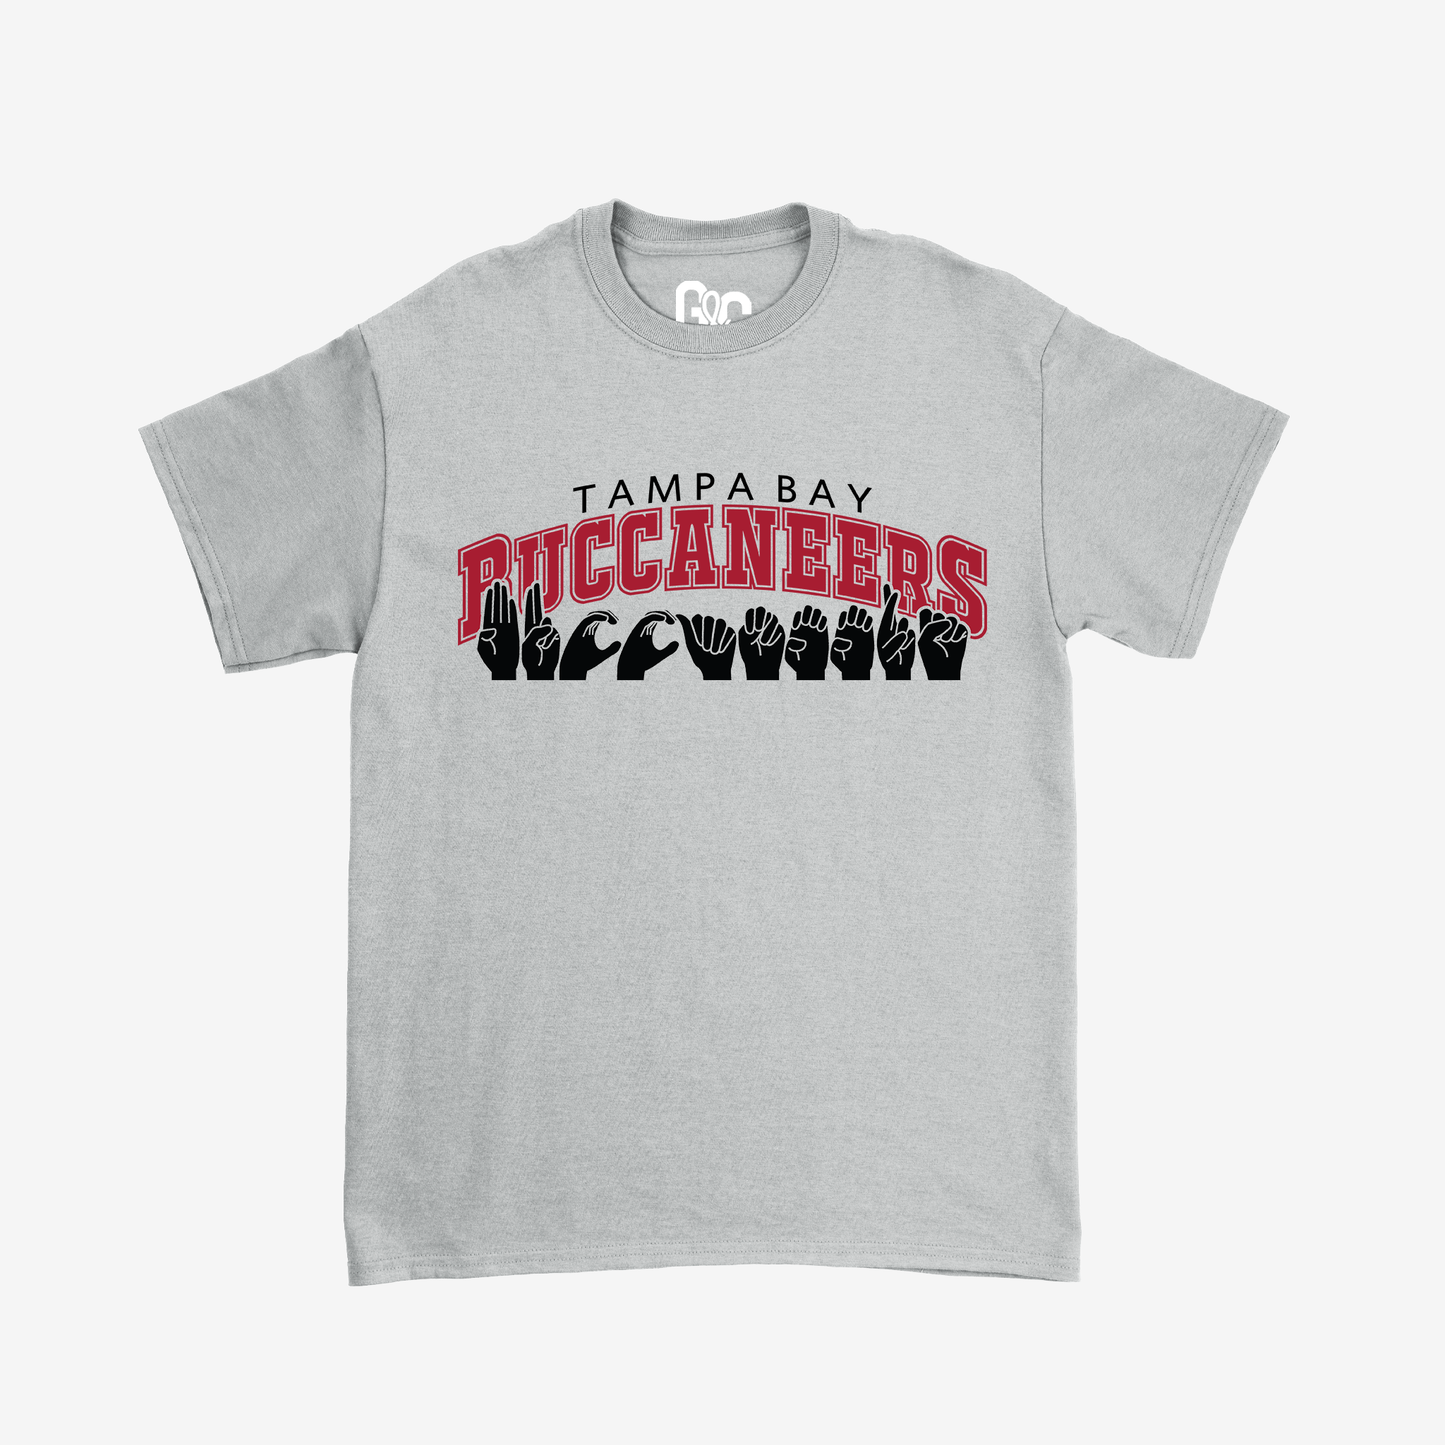 Tampa Bay Buccaneers Youth Tee